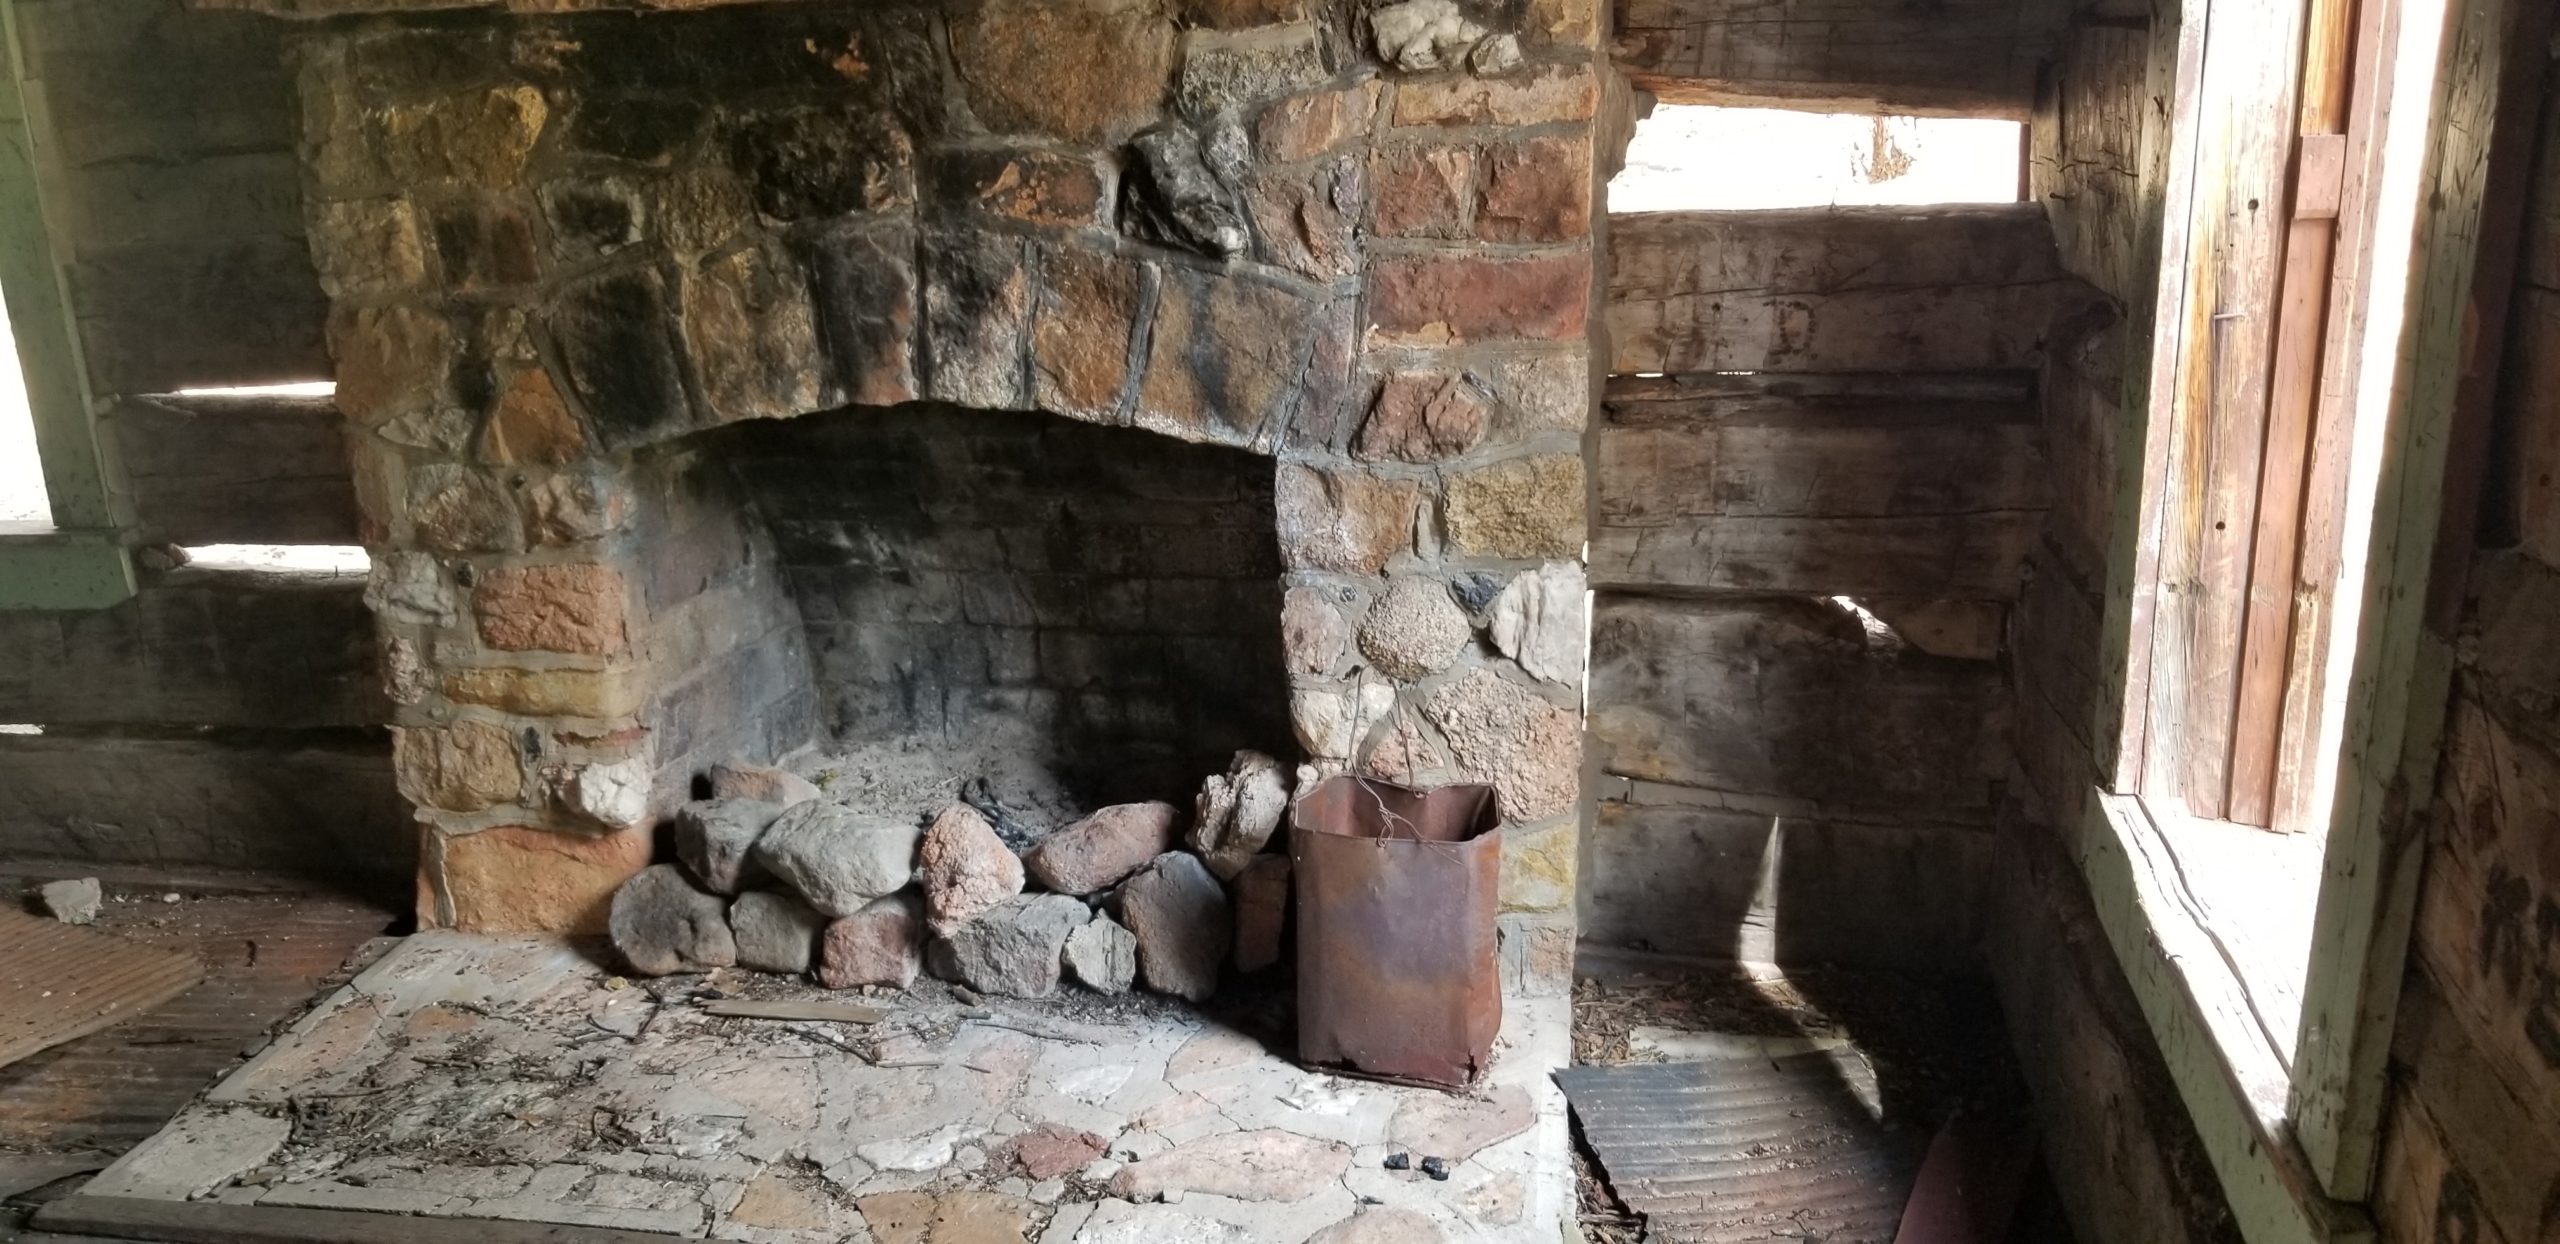 The interior of one of the old cabins at the Lost Park Reservoir site. You can imagine some nightcaps around the fireplace. Photo credit: Denver Water.